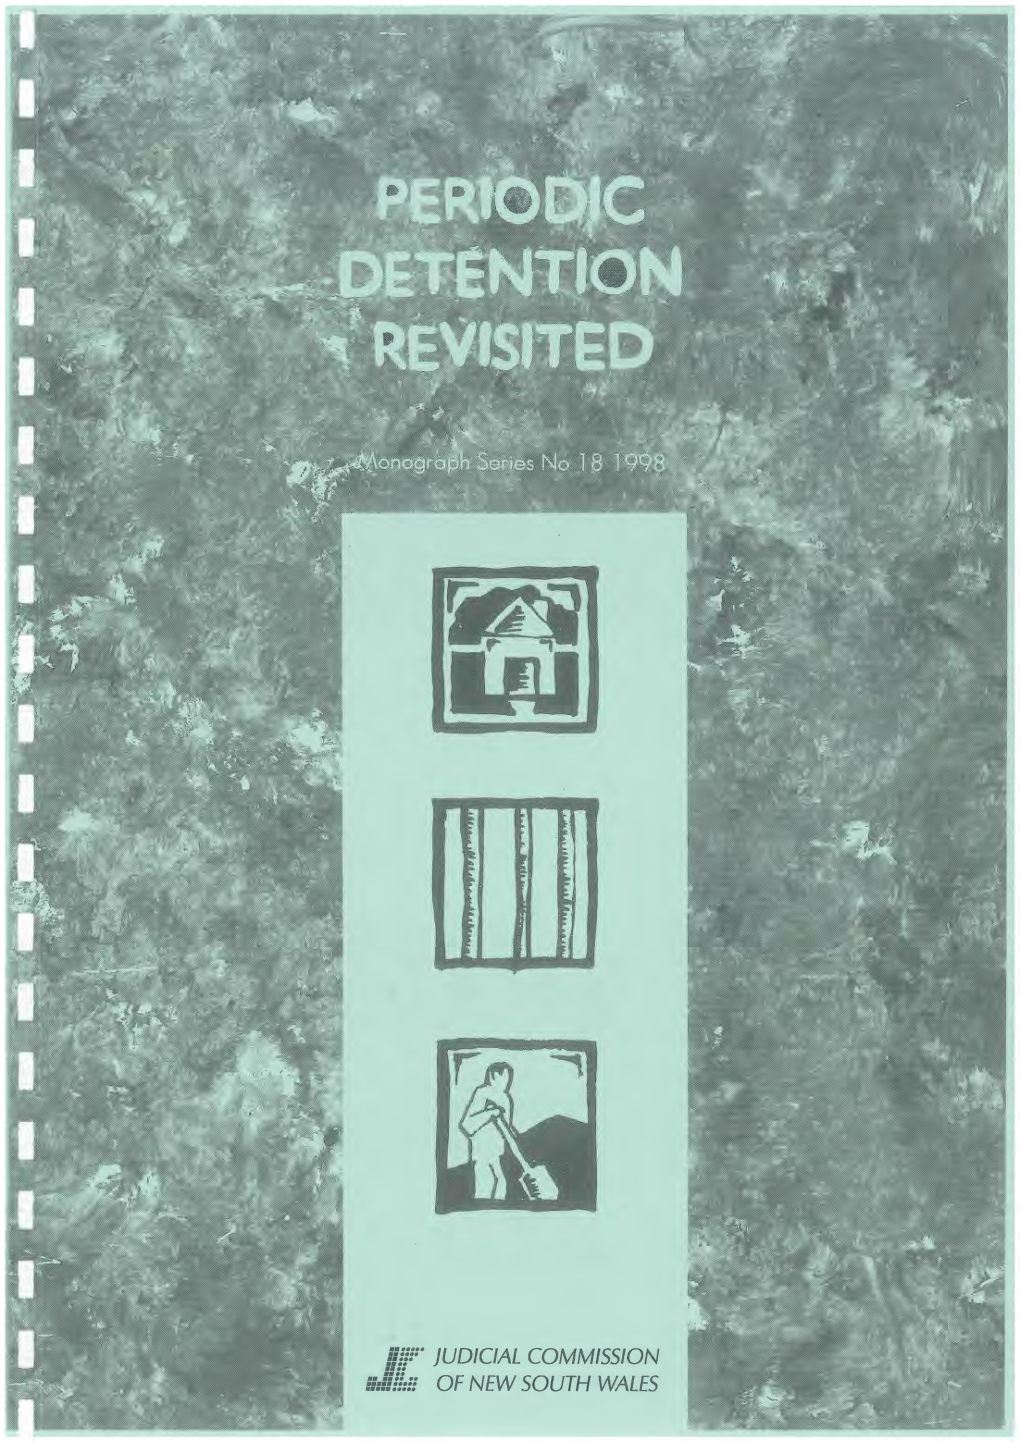 OF NEW SOUTH WALES Periodic Detention Revisited STOP PRESS